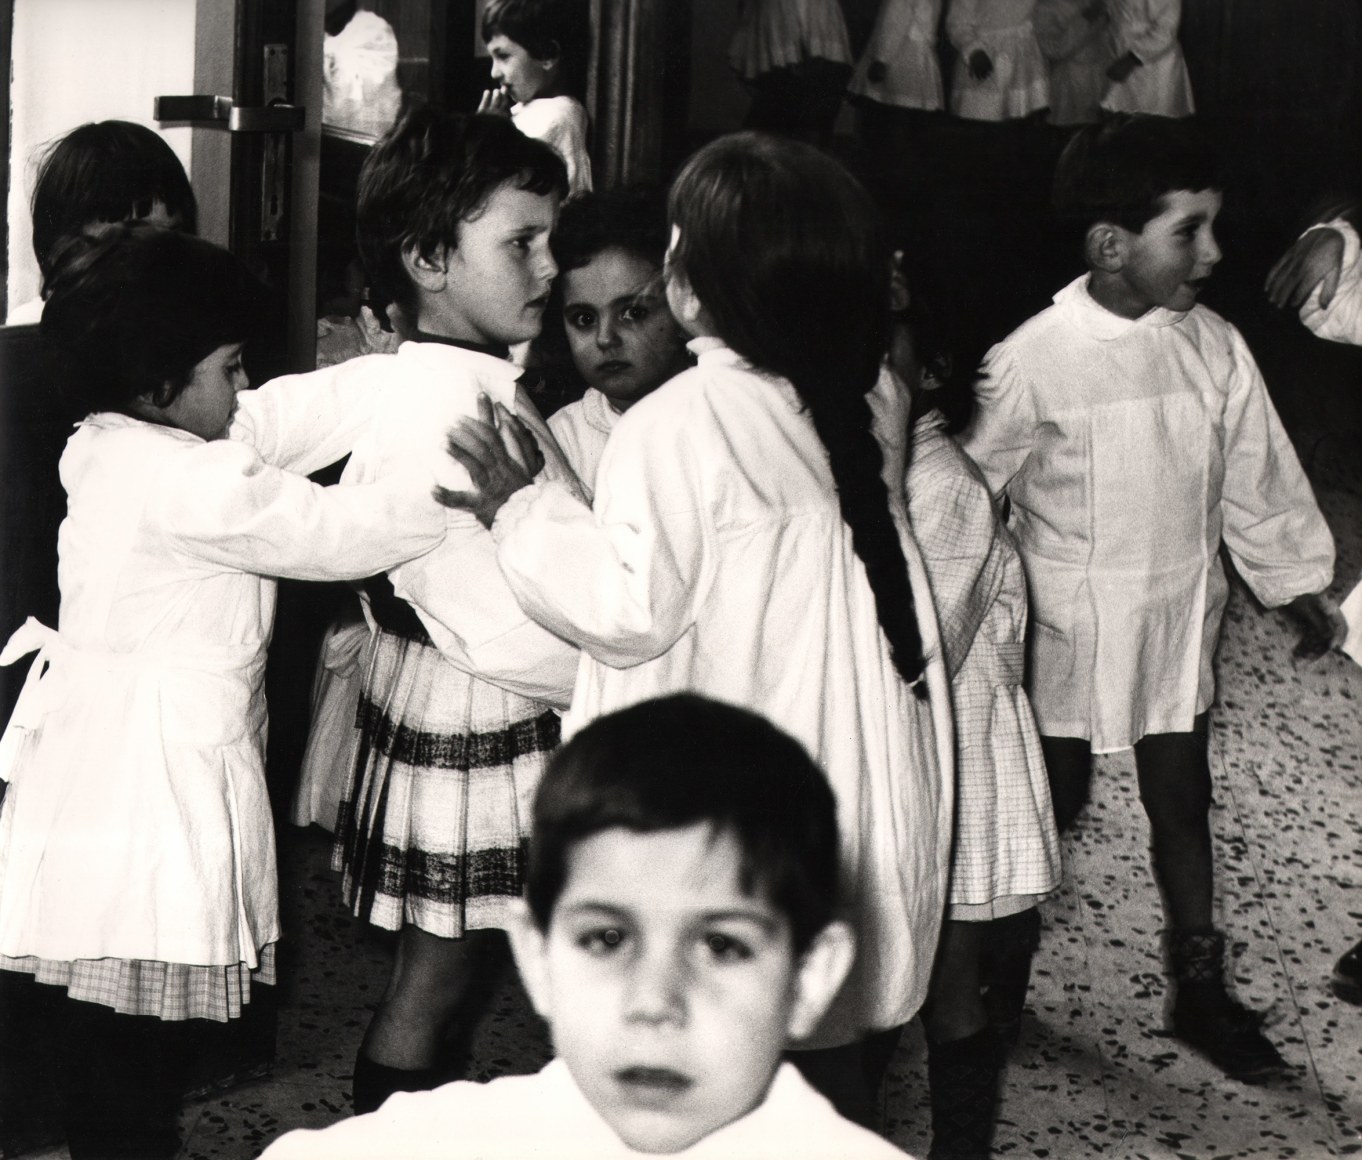 11. Renzo Tortelli, Piccolo Mondo, 1958&ndash;1959. High contrast image. A crowd of children in white gathered in a room.